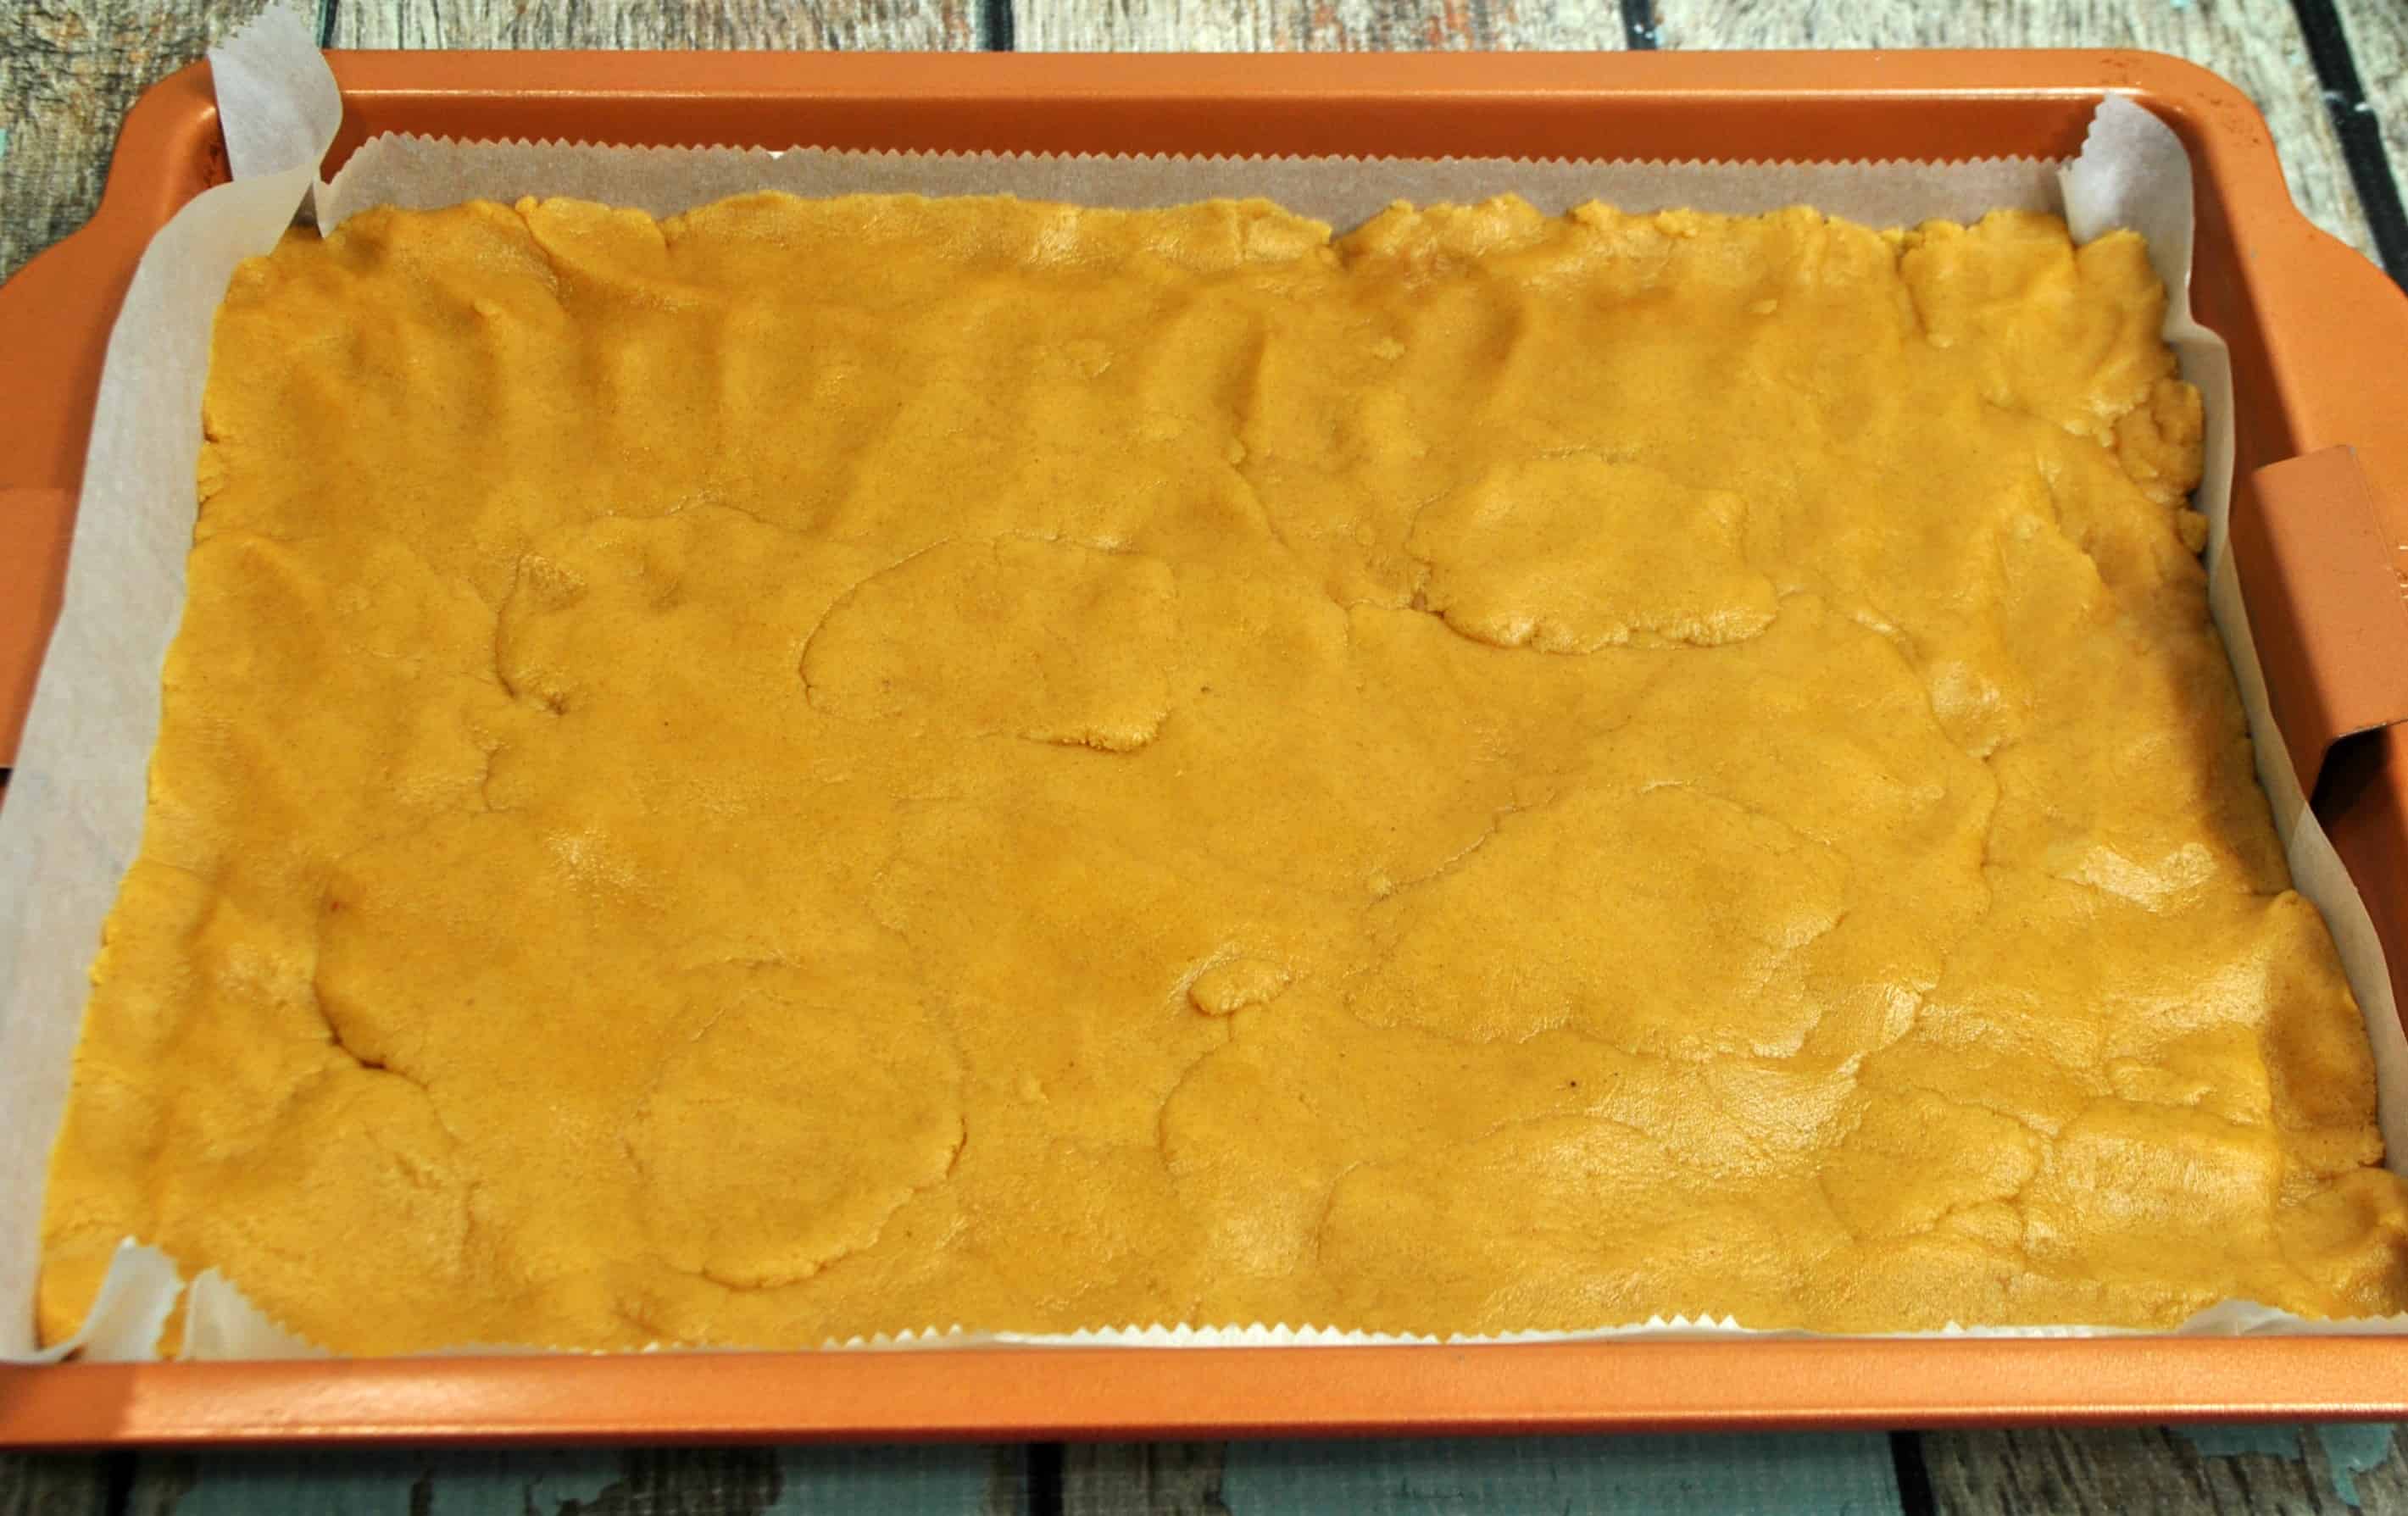 The peanut butter base in a baking pan